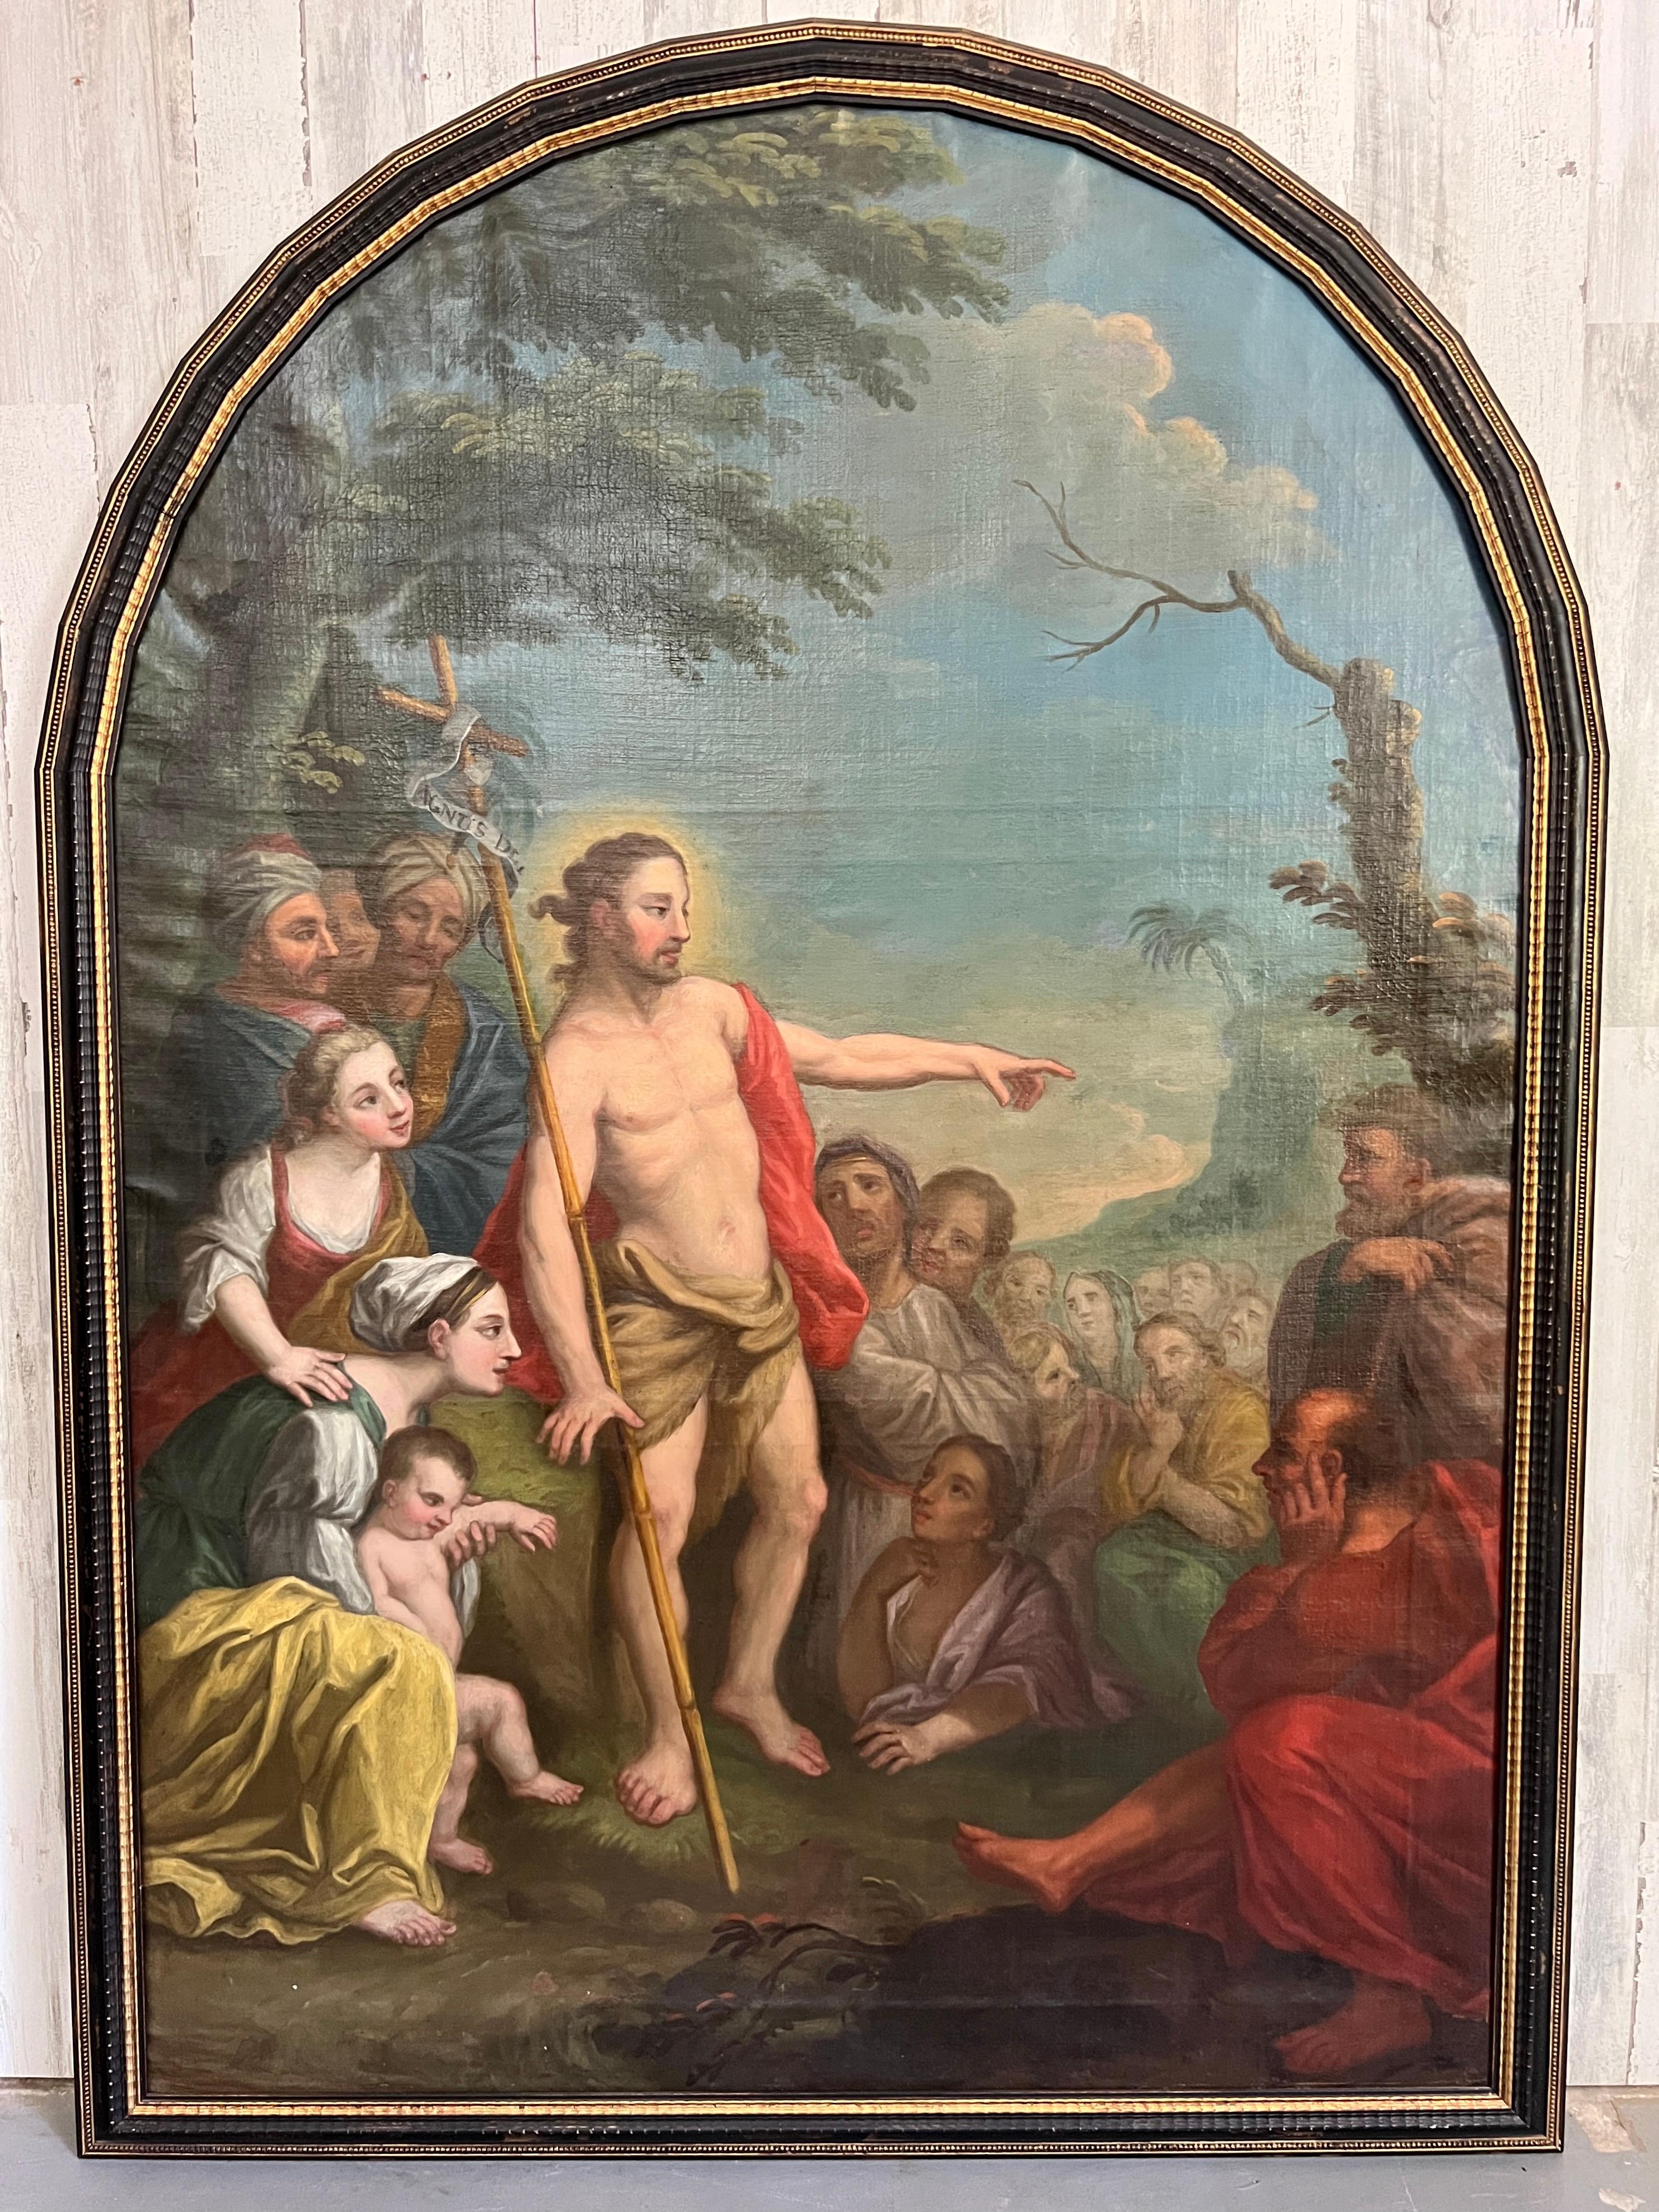 18th Century antique old master painting of St. Raymond Nonnatus Saint Raymond Nonnatus is the patron for life, for expectant mothers, and for families.
Saint Raymond did go on Campaign for the Christian captives to save them. And while he was